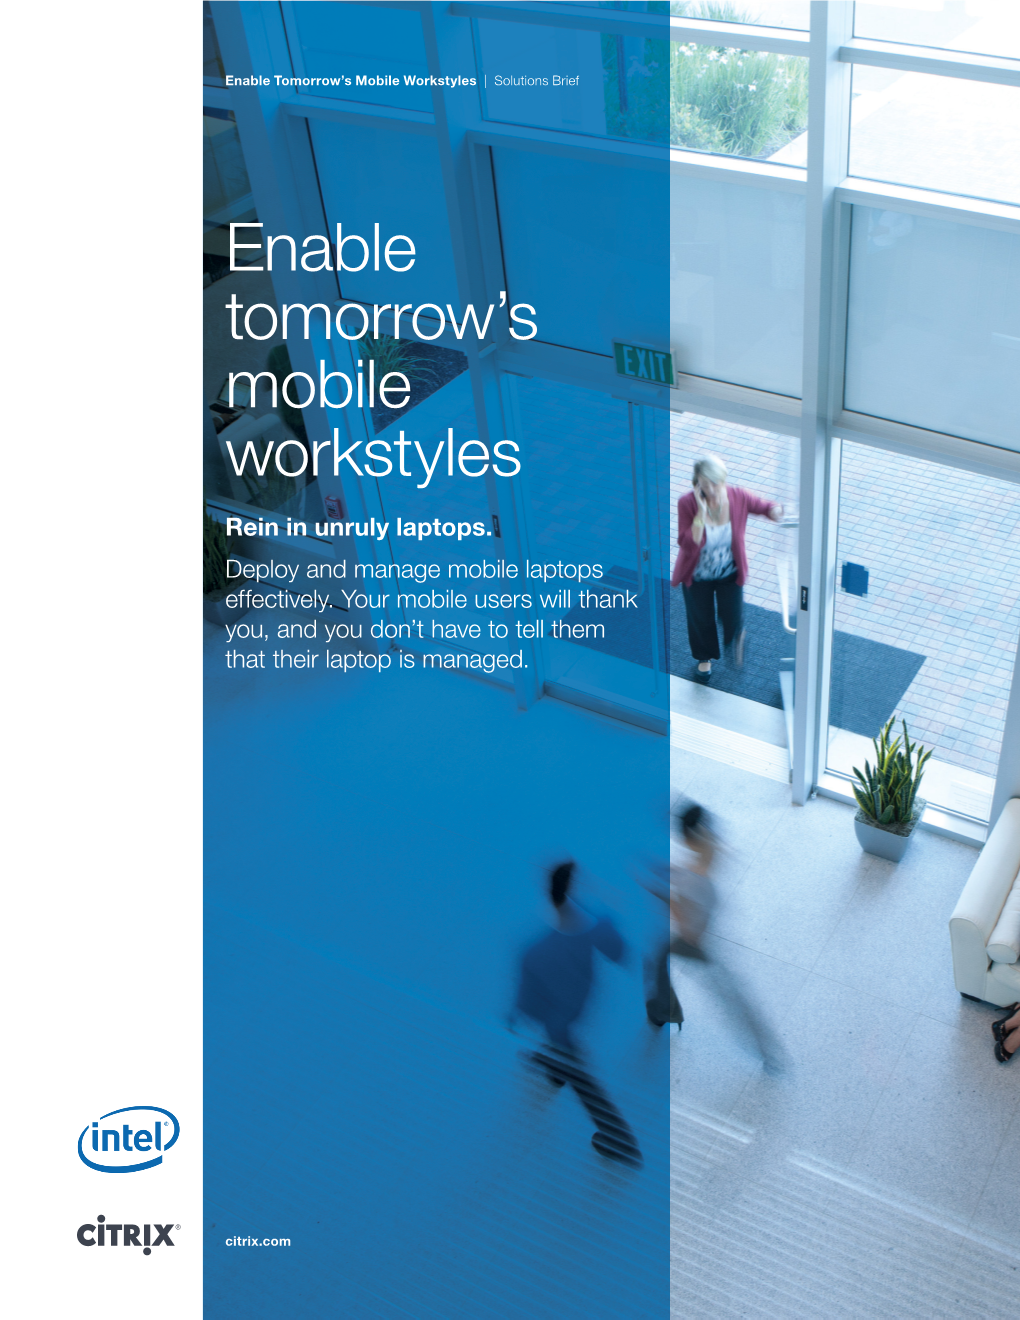 Enable Tomorrow's Mobile Workstyles